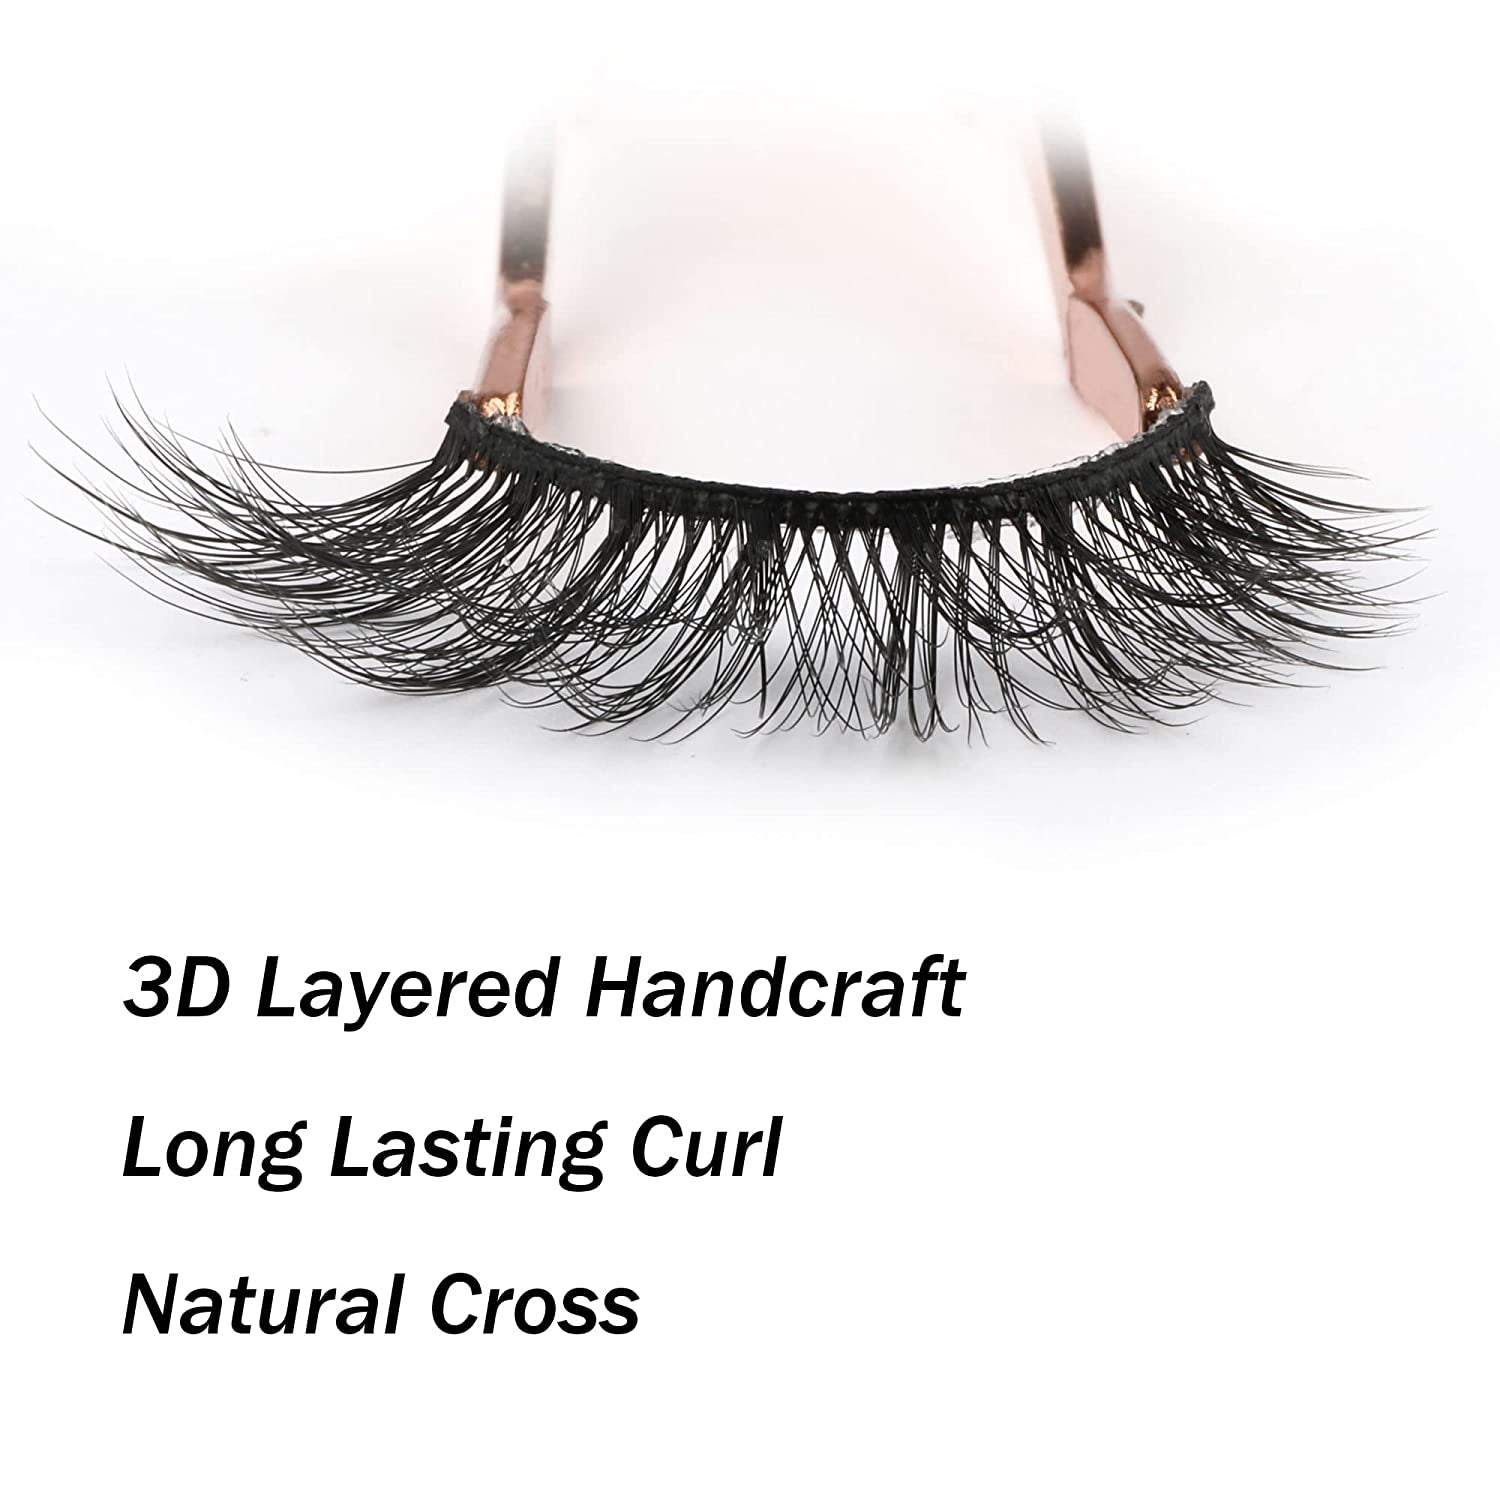 False Eyelashes 14Mm Faux 3D Mink Lashes Natural Look Fluffy Cat Eye Wispy Lashes Pack by , 14 Pairs